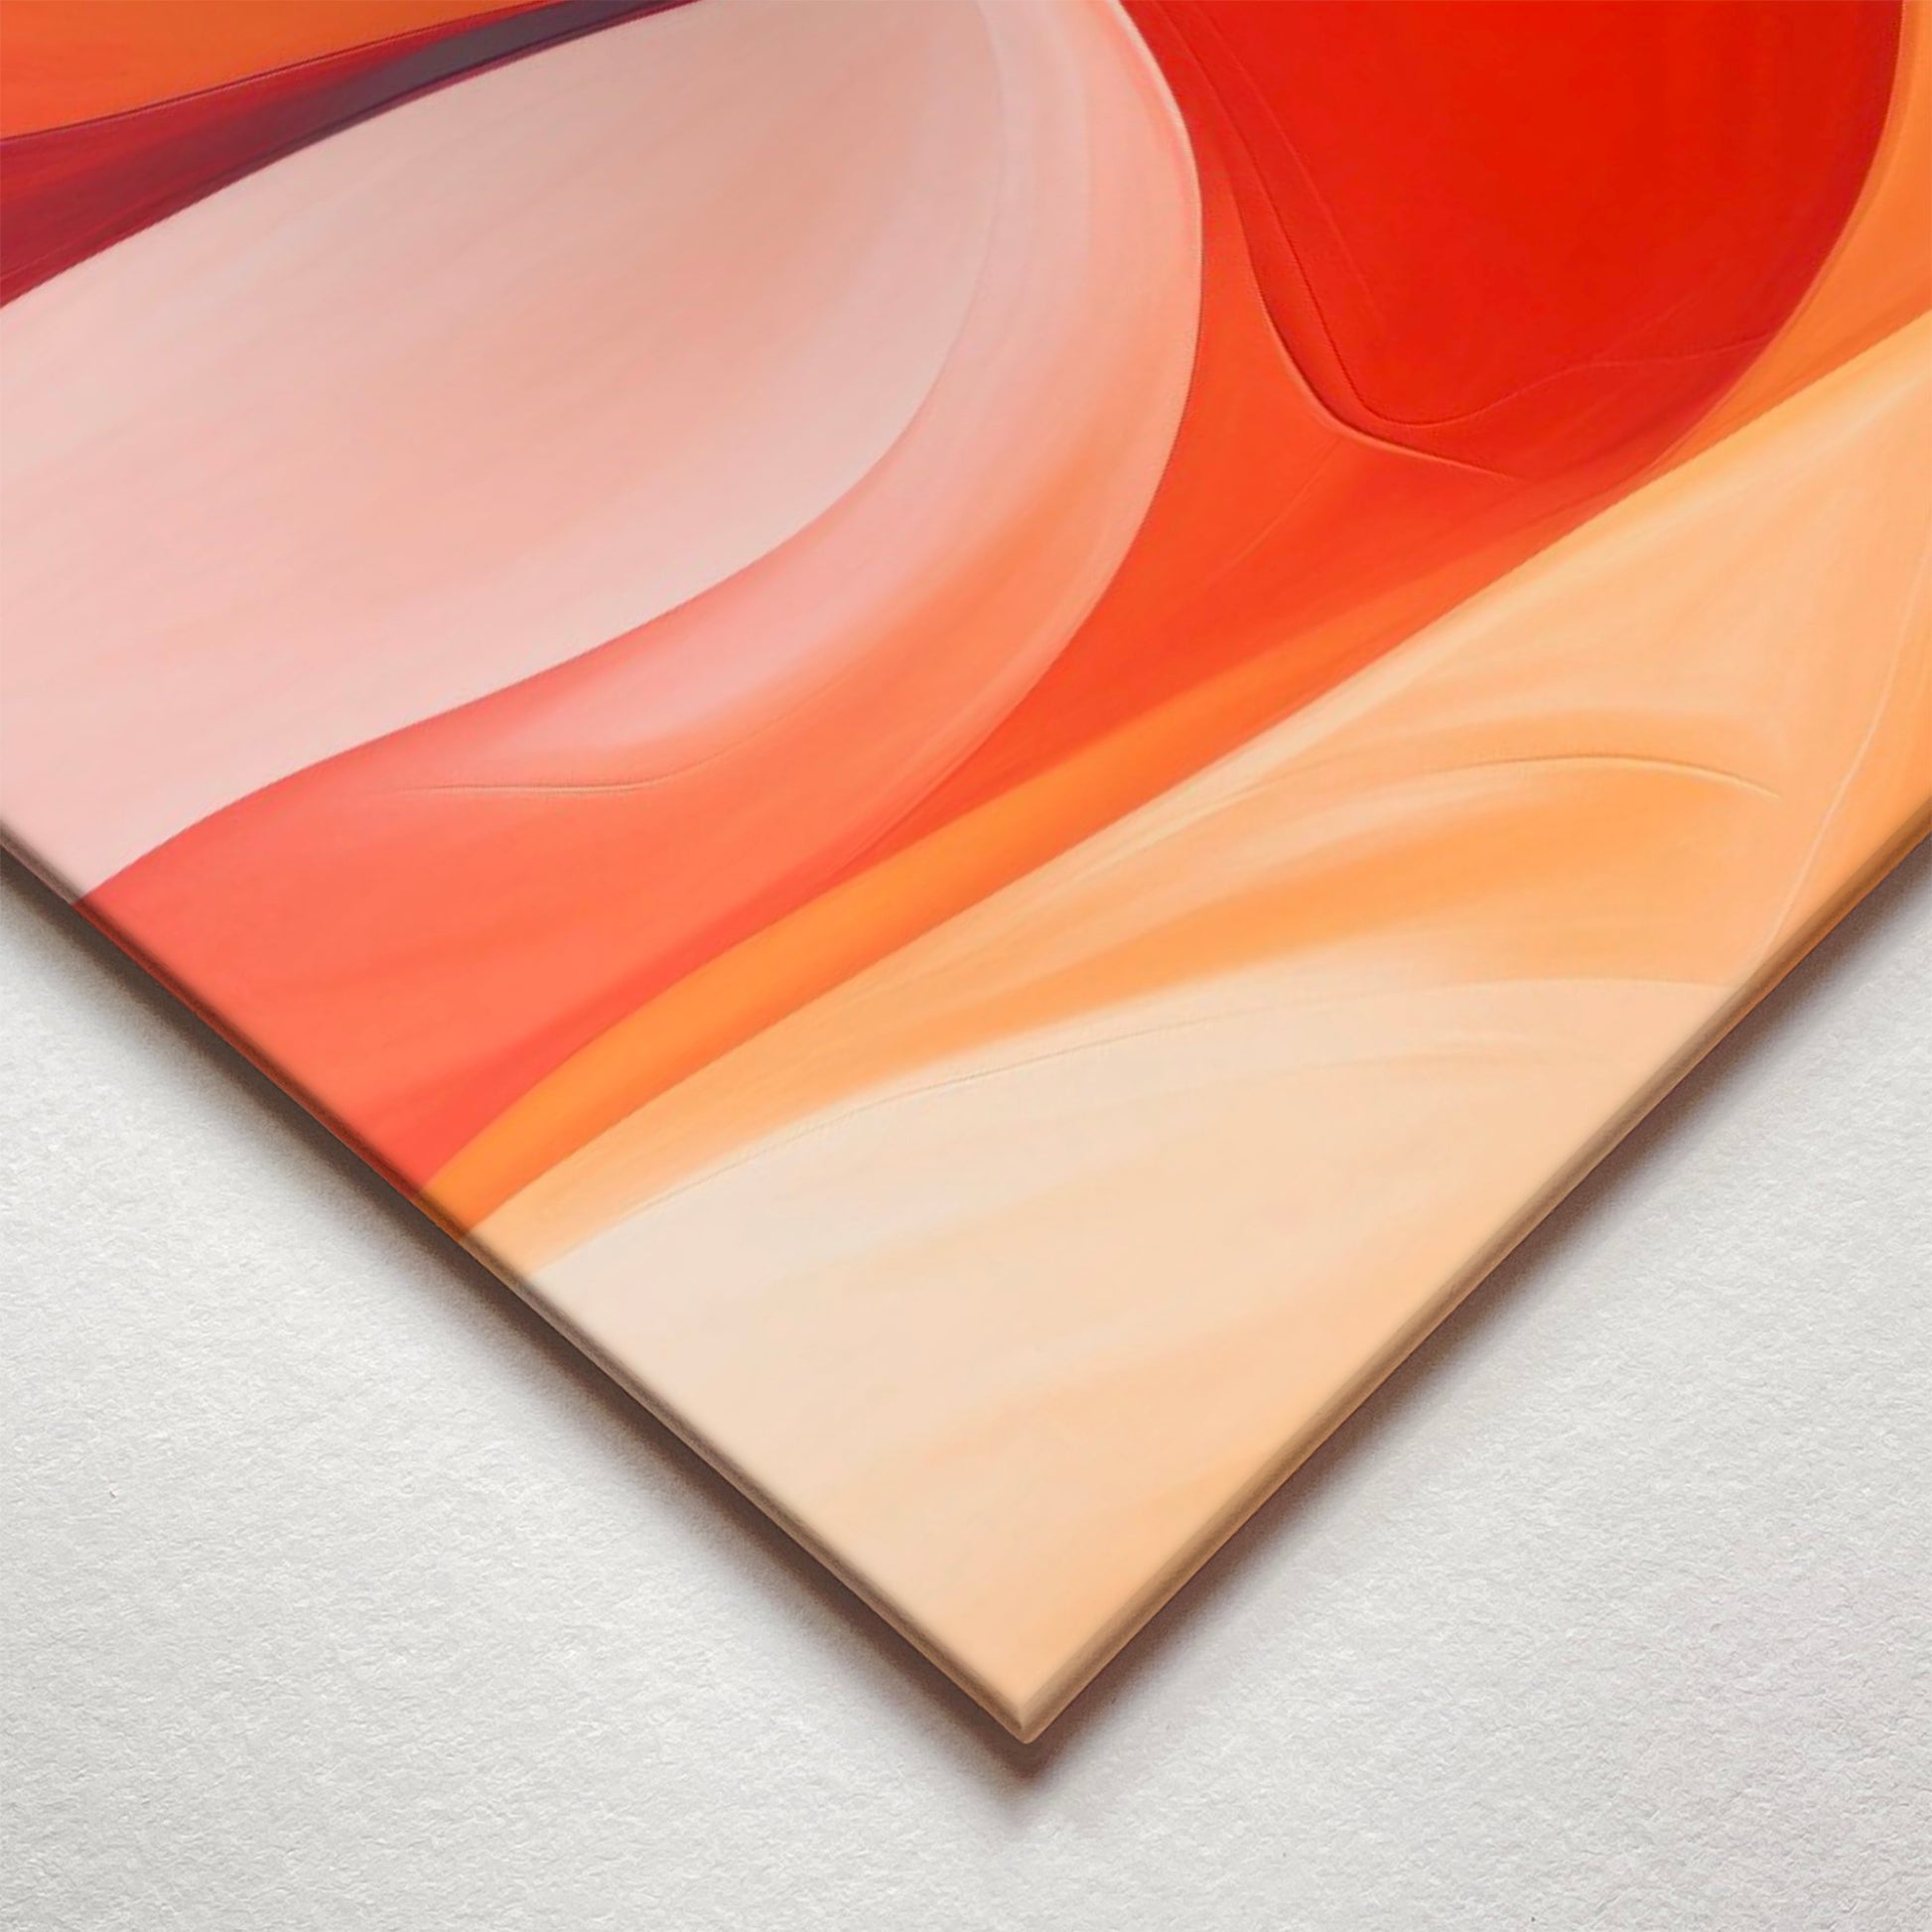 A closeup corner detail view of a metal art poster display plate with printed design of a Turbulence Abstract Painting